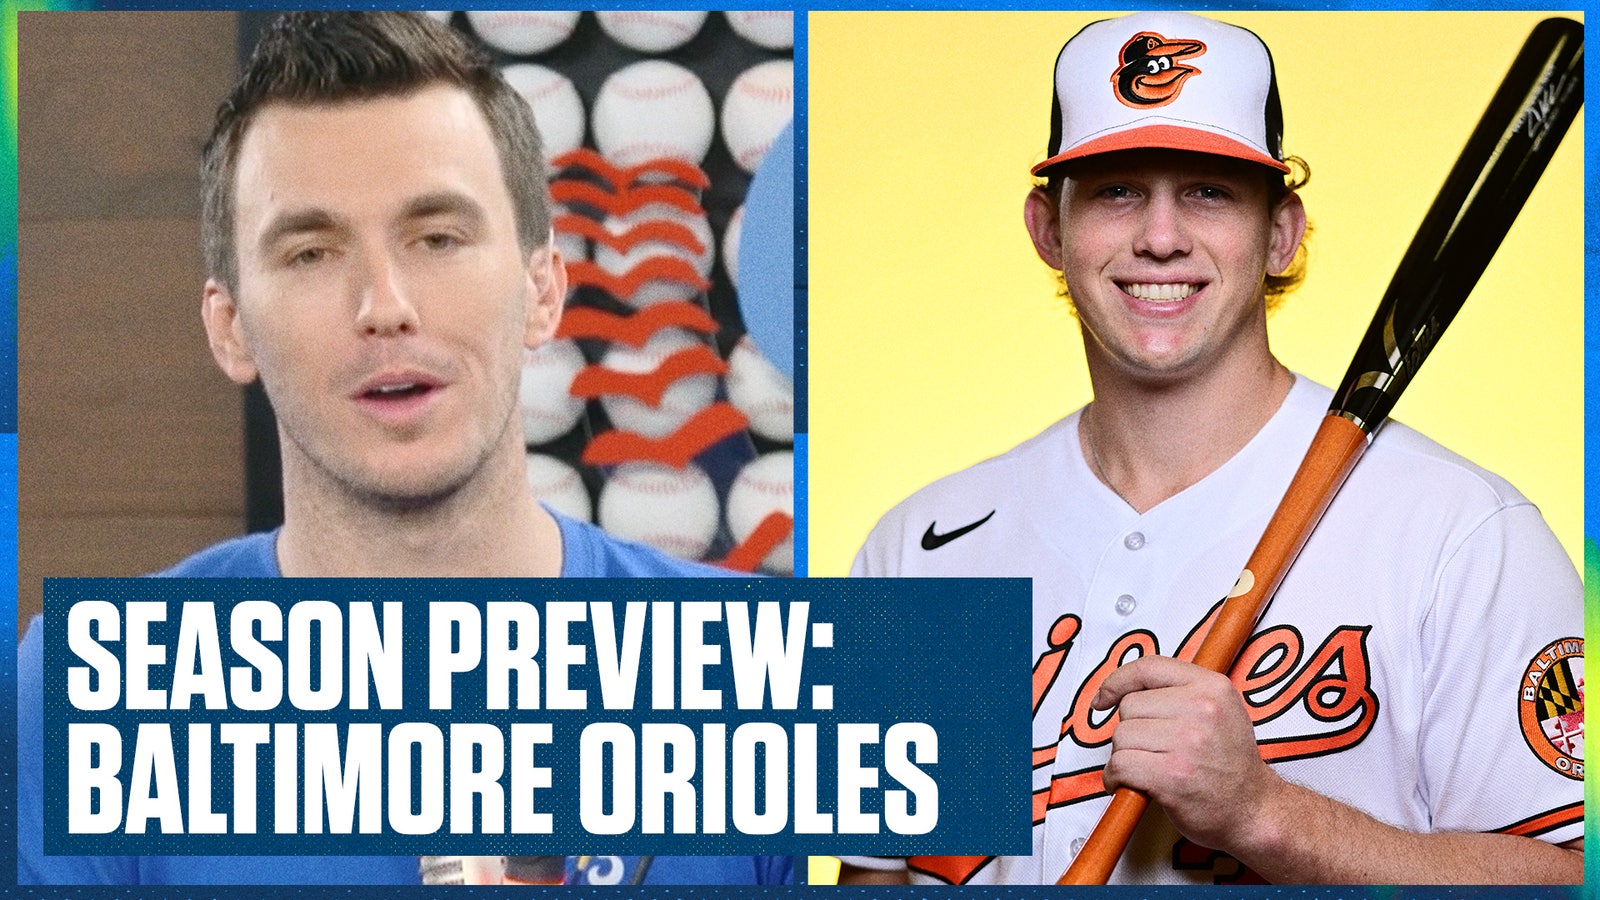 Baltimore Orioles Season Preview: Can they repeat last year's success?